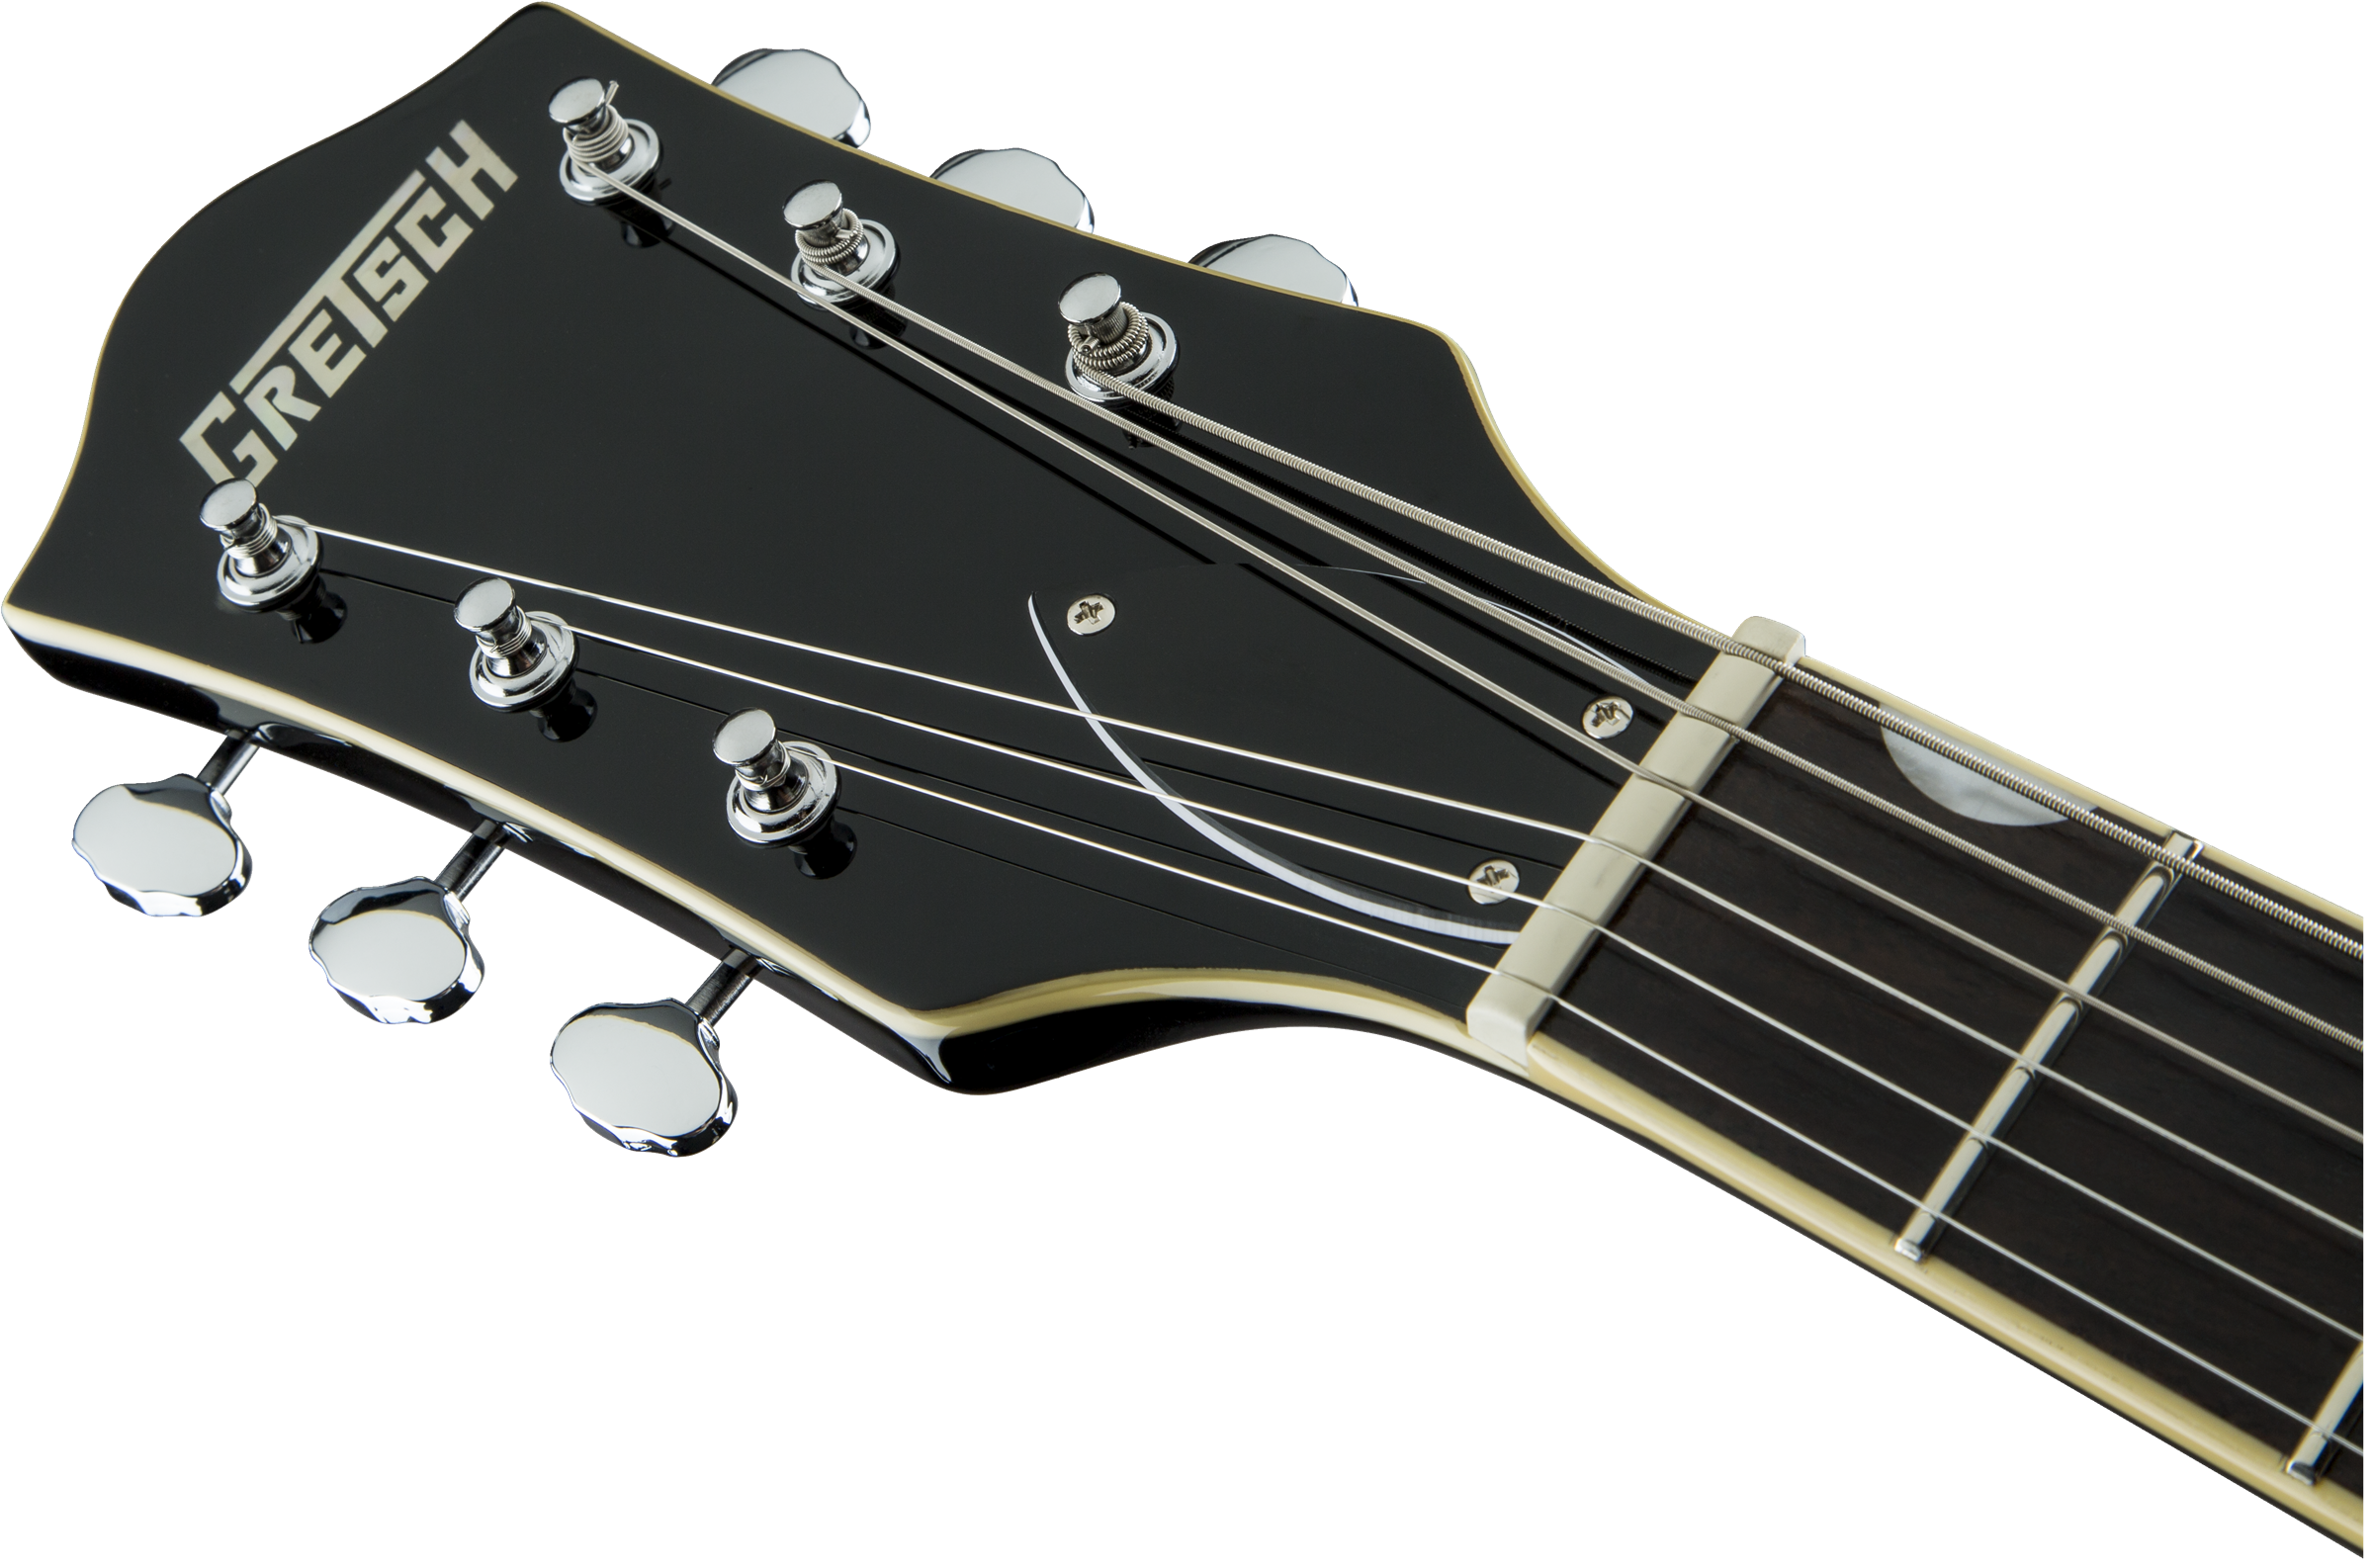 Gretsch G5420LH ELECTROMATIC® HOLLOW BODY SINGLE-CUT, LEFT-HANDED - L.A. Music - Canada's Favourite Music Store!